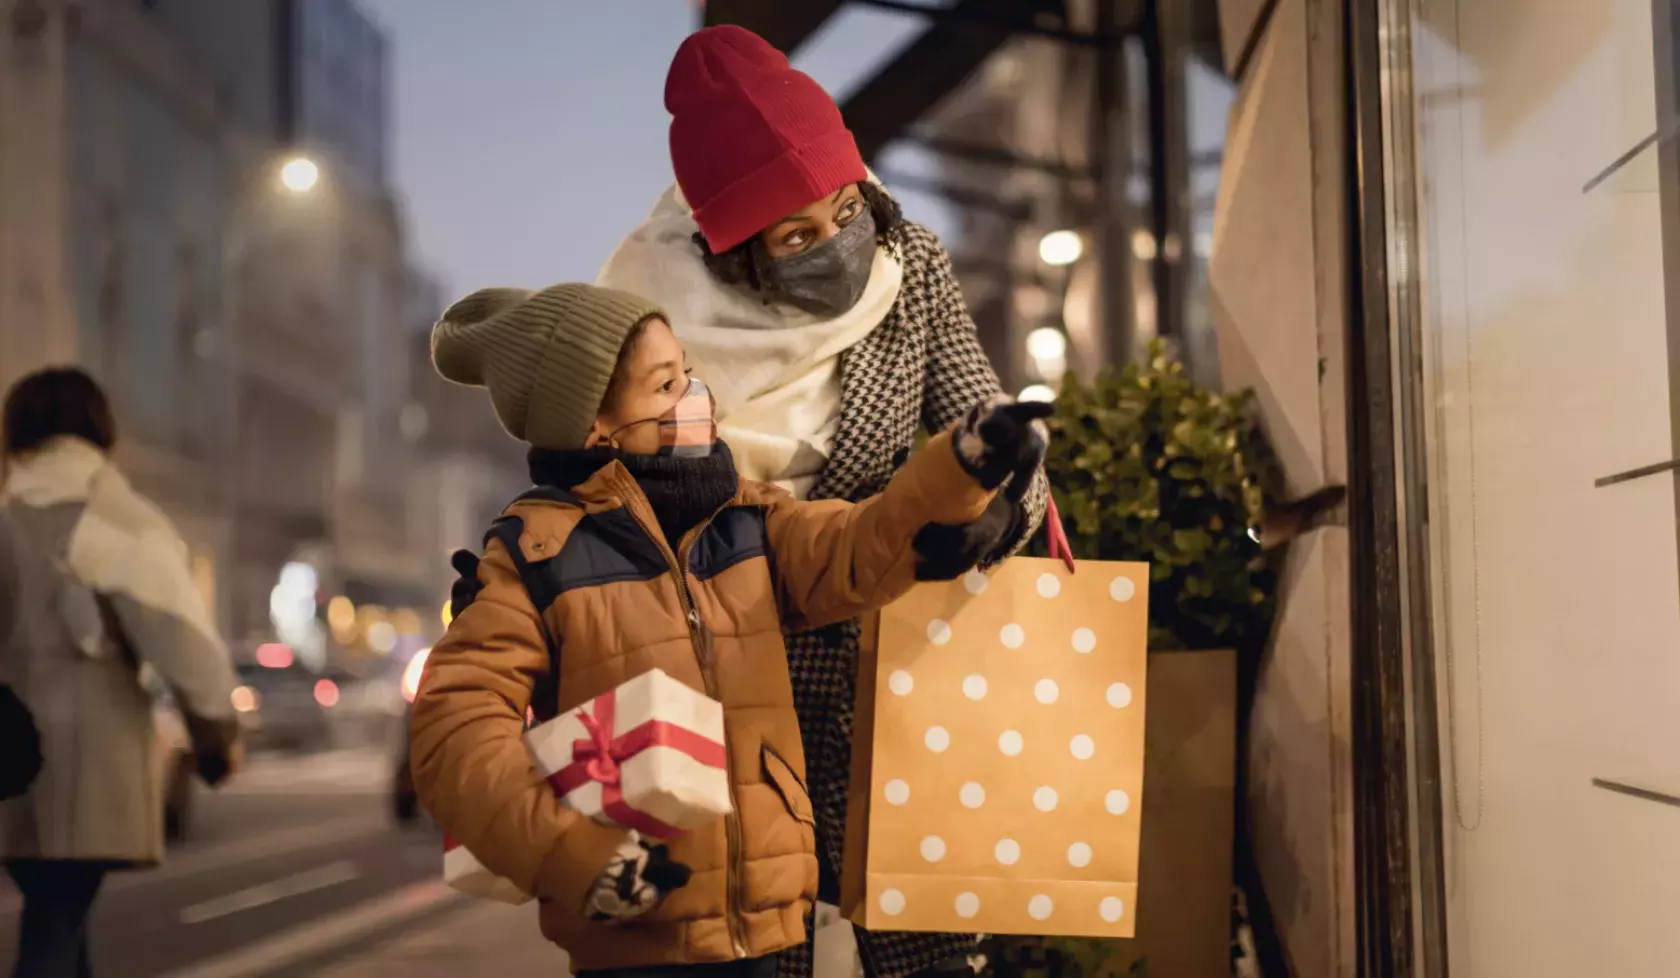 Holiday Travel and Shopping Safely during COVID pandemic